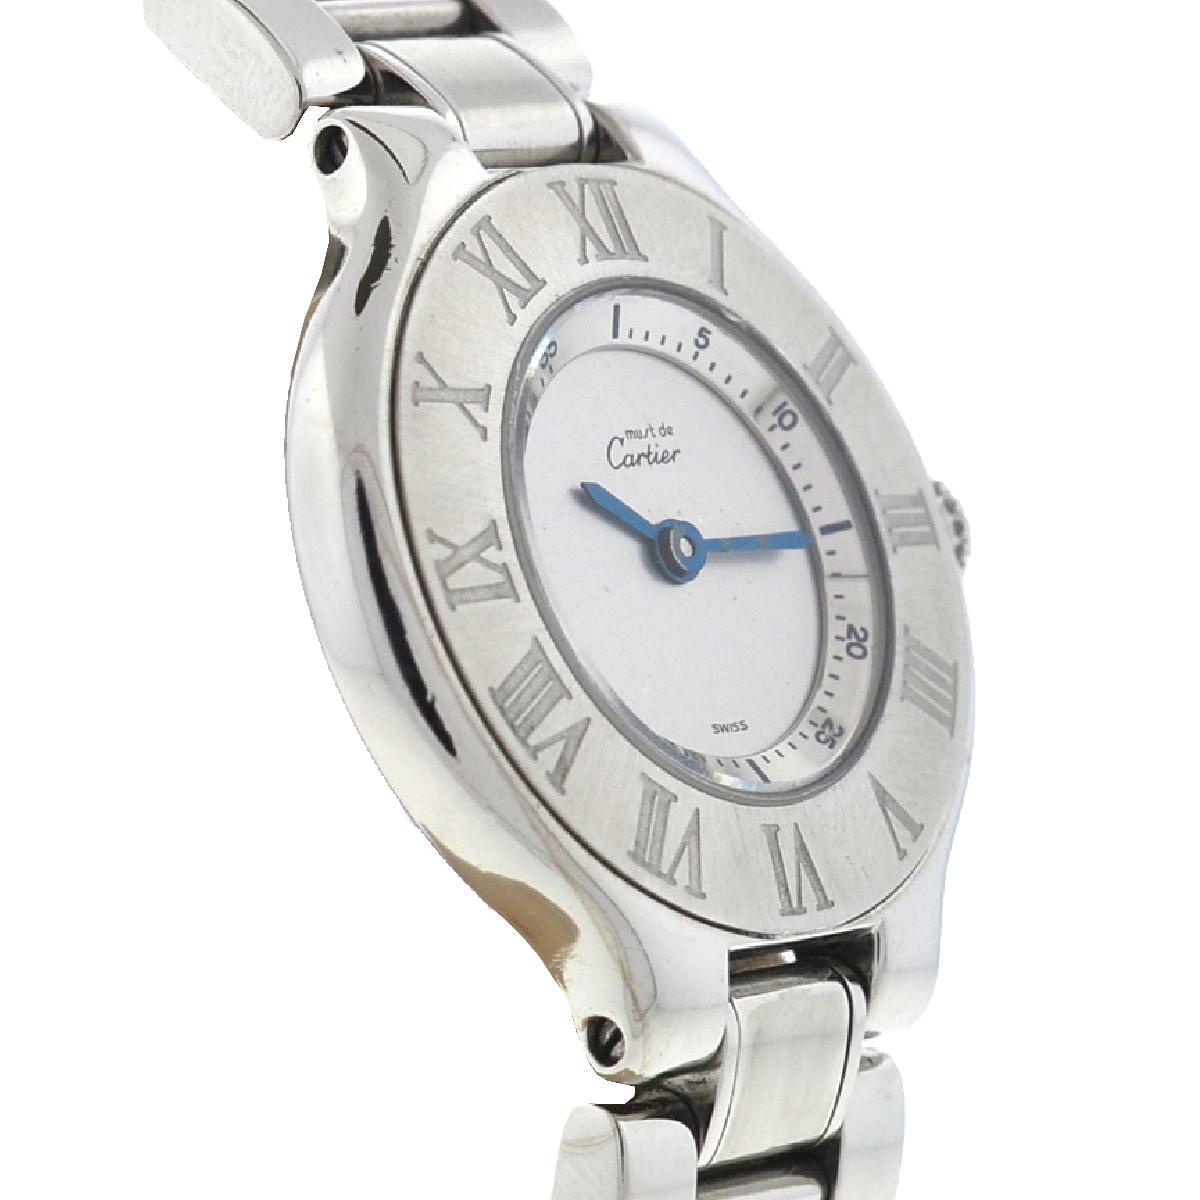 Company-Cartier
Model-Must 21
Case Metal-Stainless Steel
Case Size -27.5mm
Dial-Silver- Minute hand is fading and minute markers around the dial is also fading
Bezel-Stainless Steel
Crystal-Sapphire Scratch Resistant -
Bracelet-Stainless Steel -